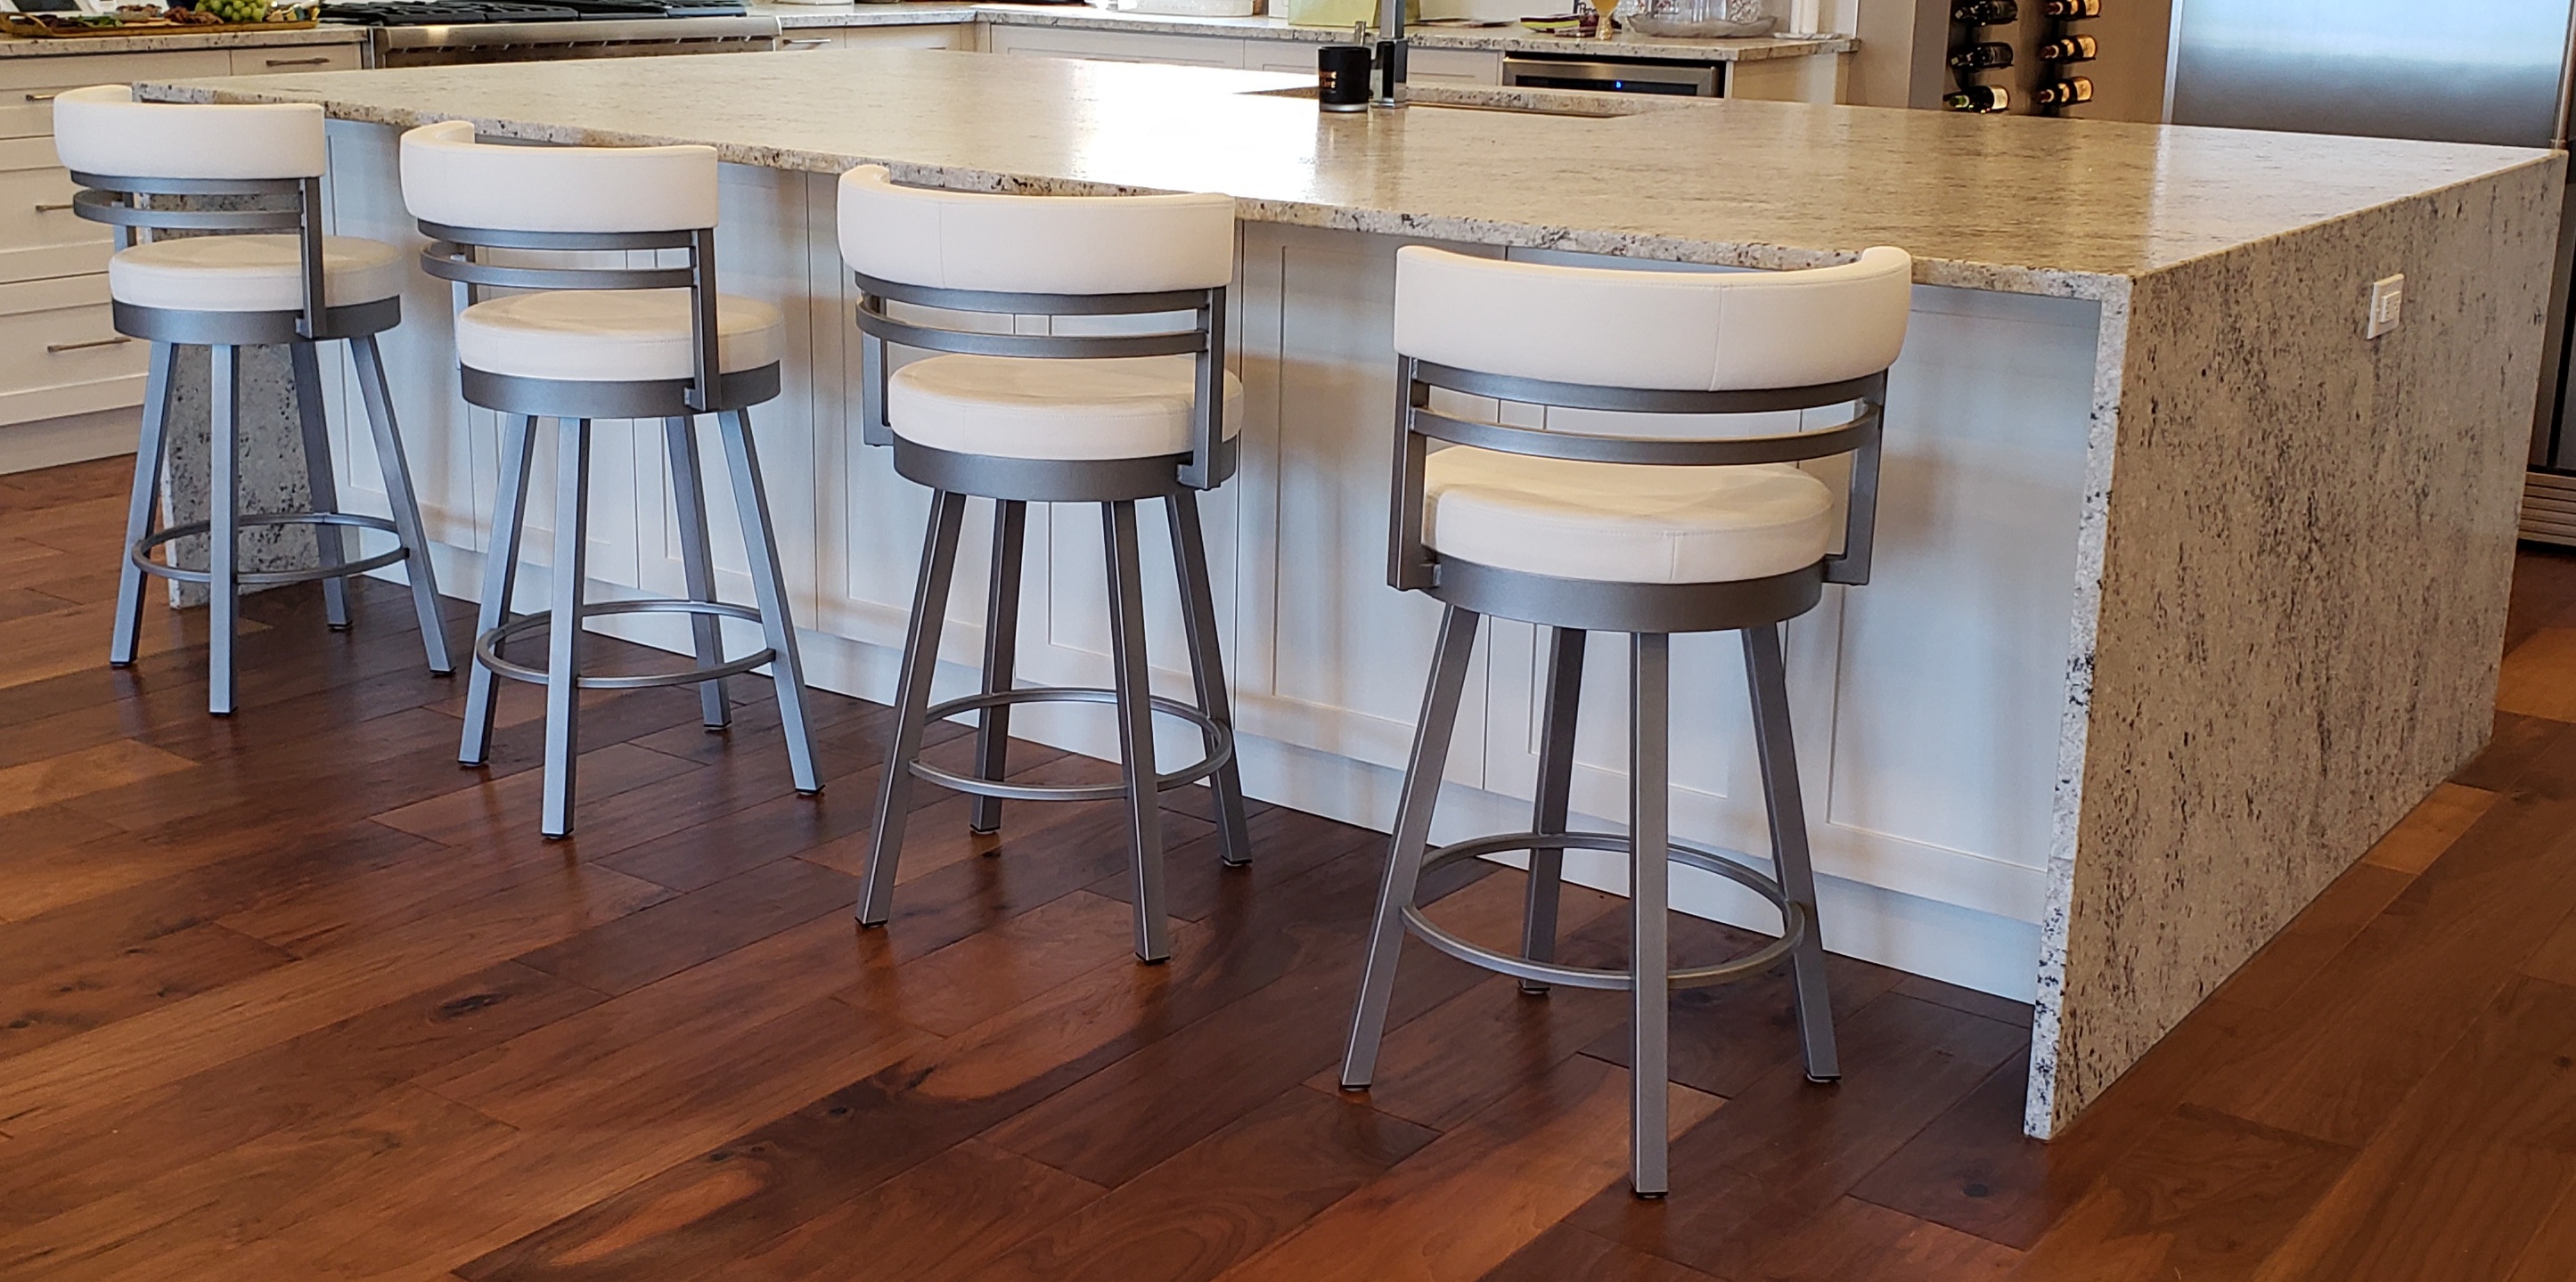 bar in kitchen with stools